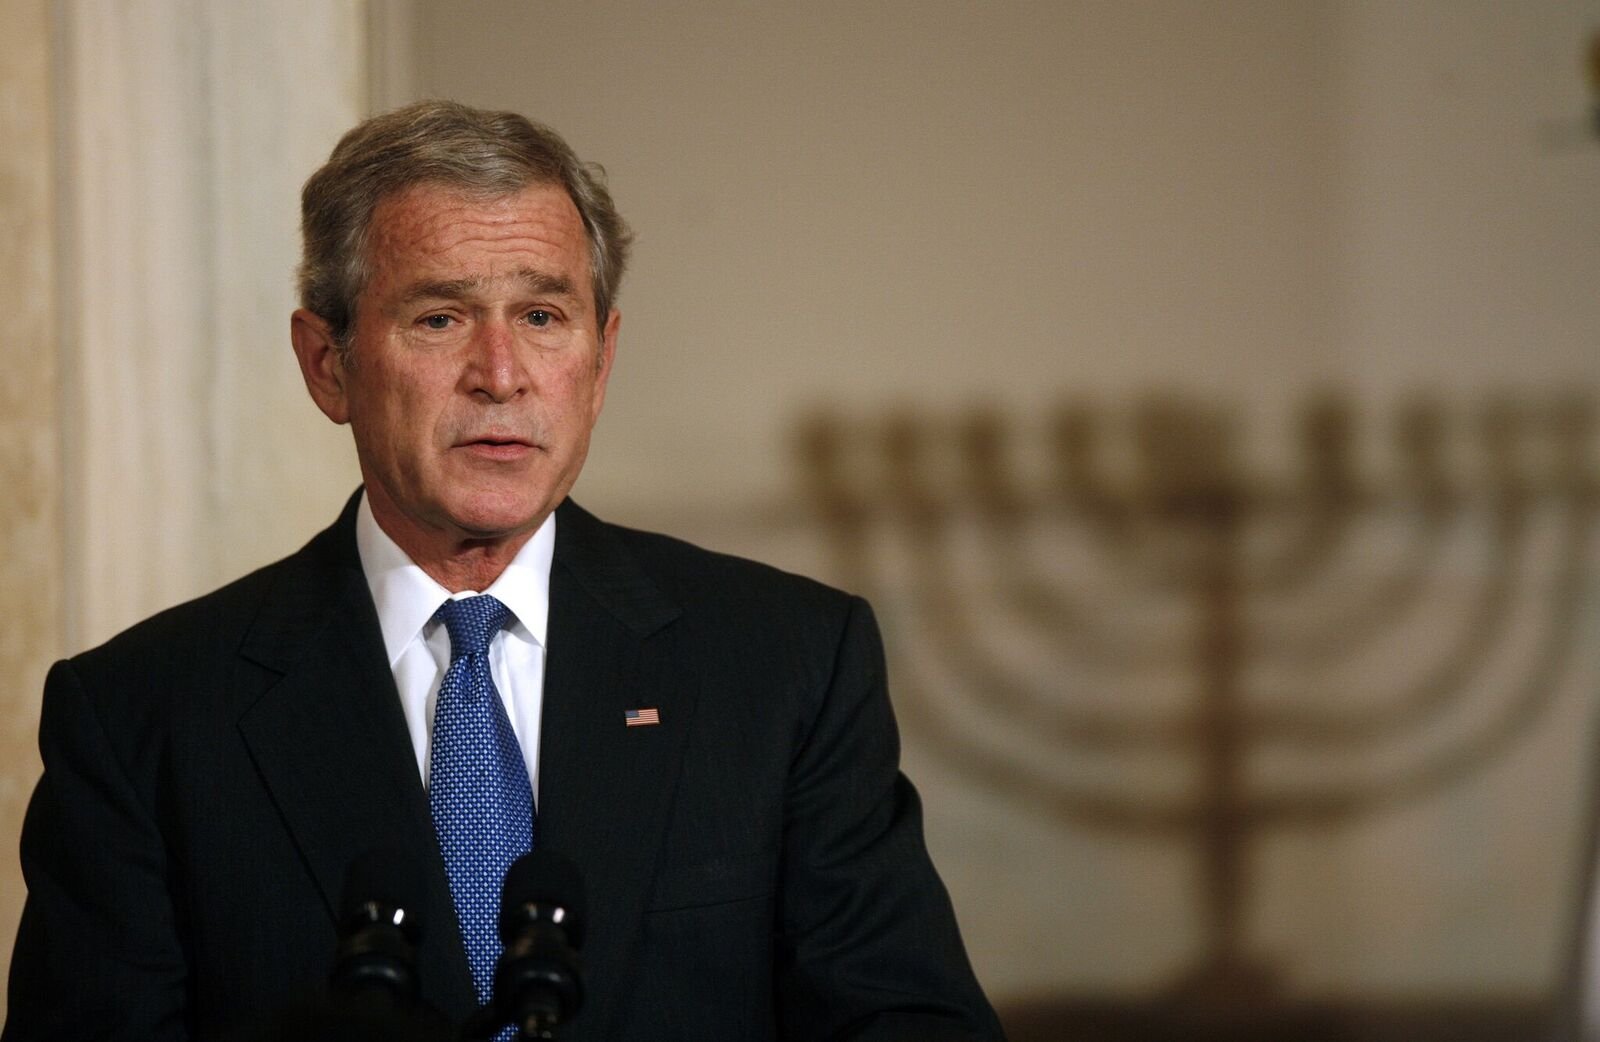 George W. Bush at a Hanukkah Reception in the Grand Foyer of the White House on December 15, 2008. | Photo: Getty Images